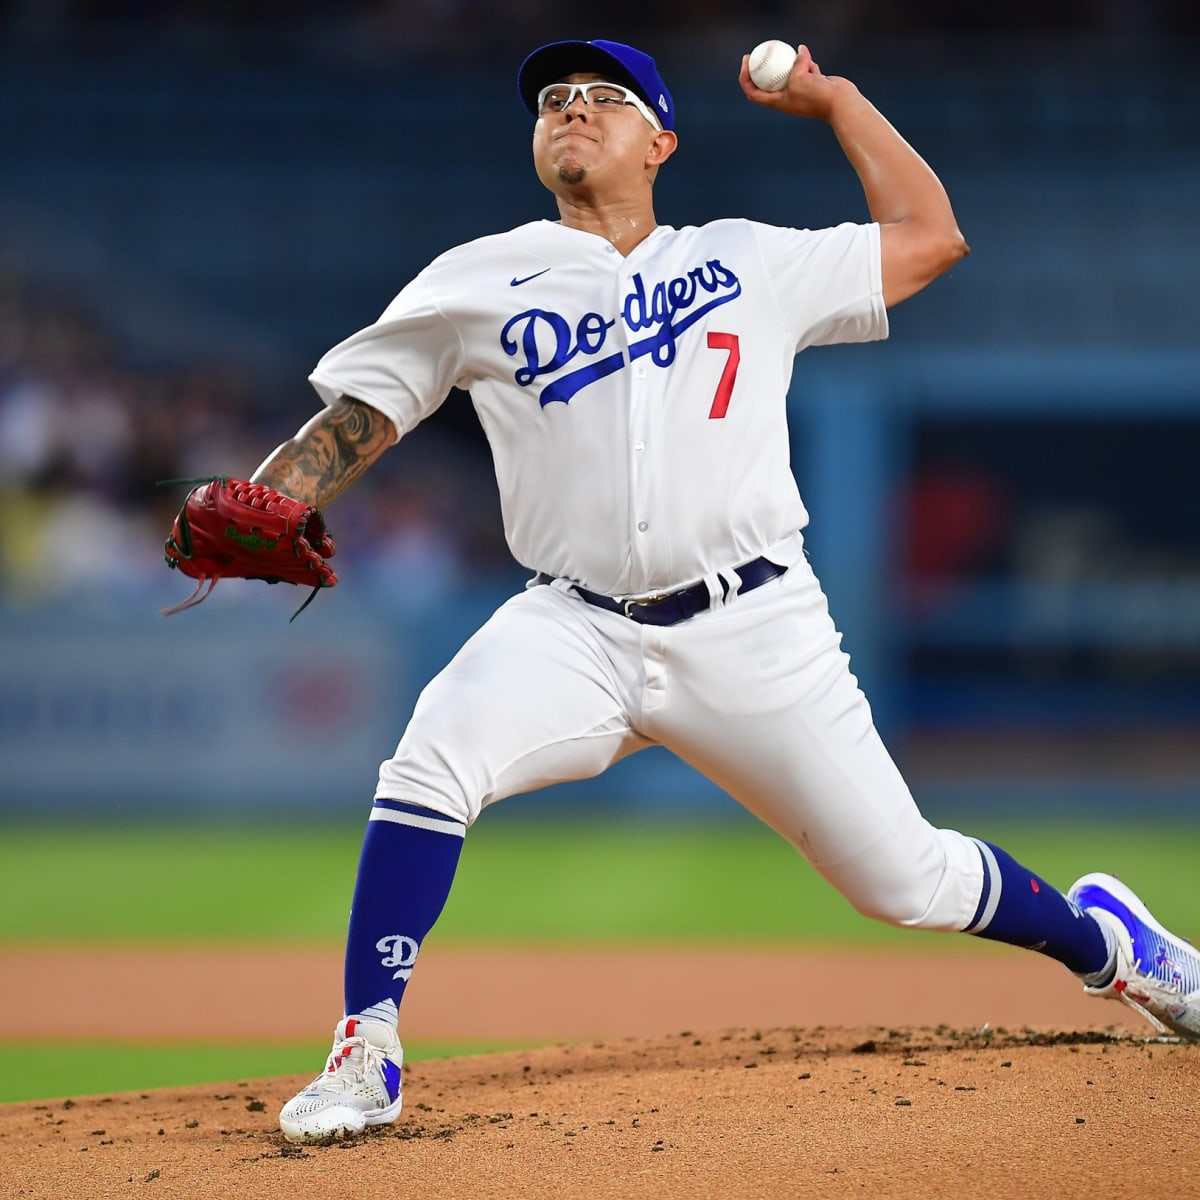 LA Dodgers rookie Julio Urias learning to deal with uncertainty – Daily News